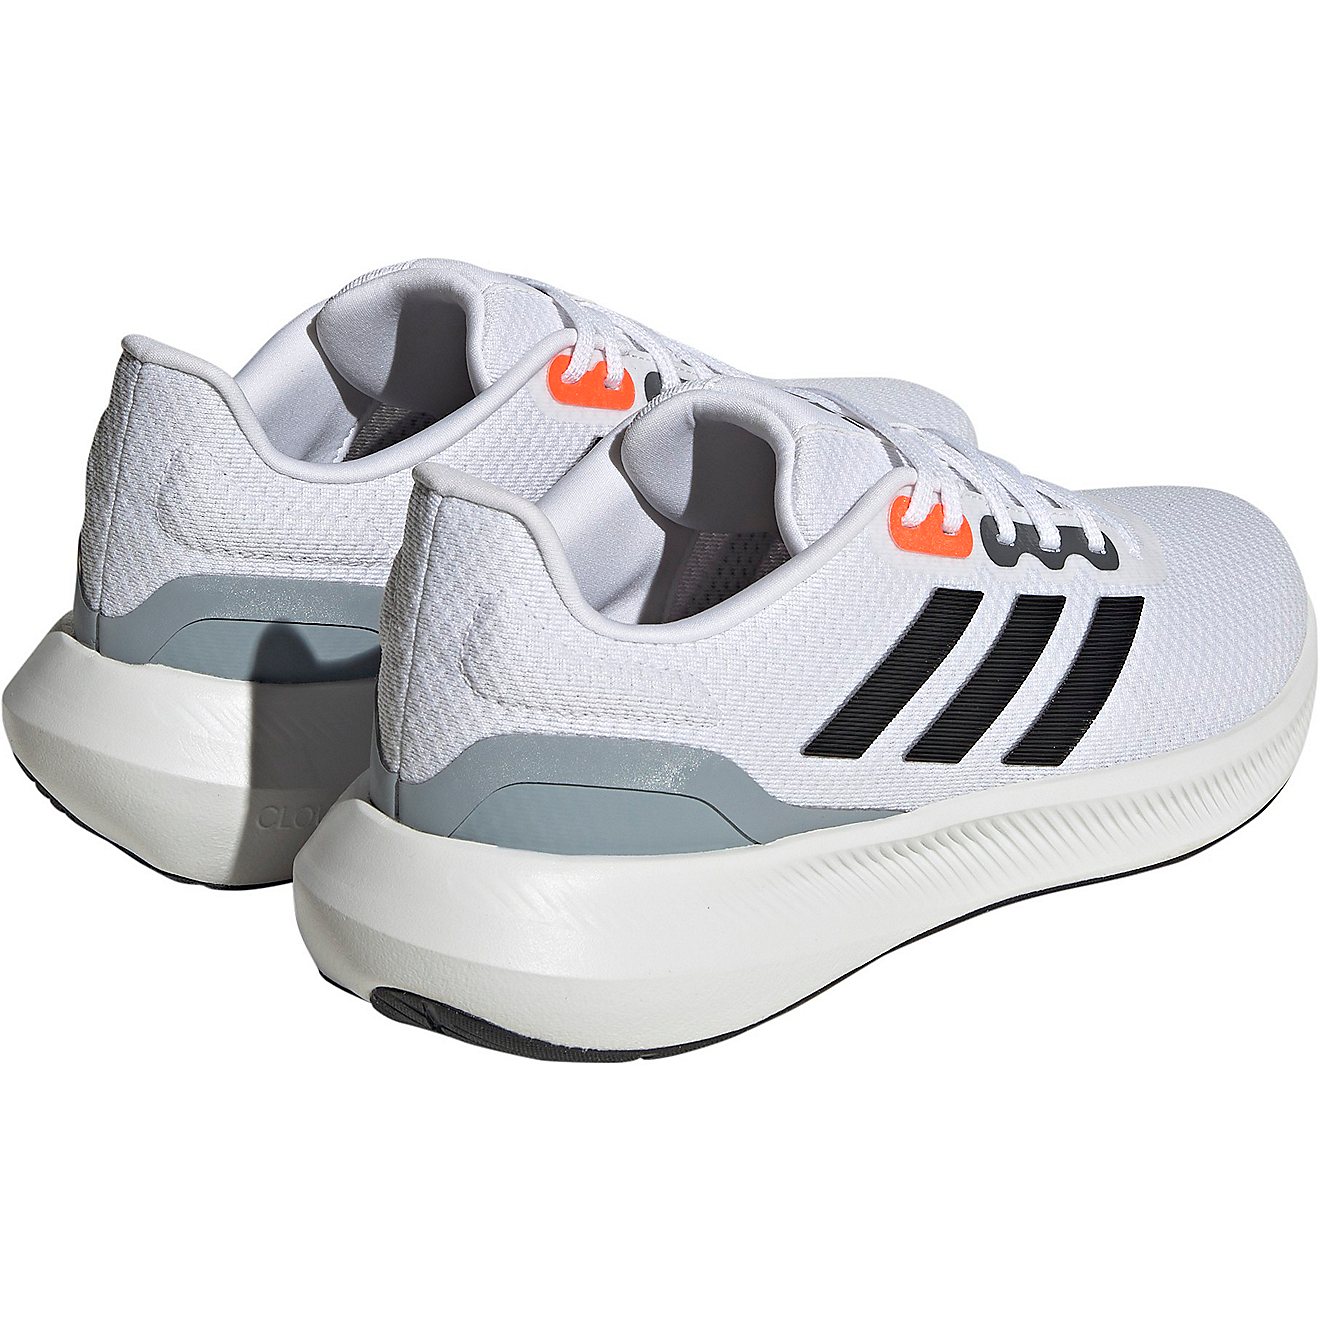 adidas Men's RunFalcon 3.0 Running Shoes                                                                                         - view number 4